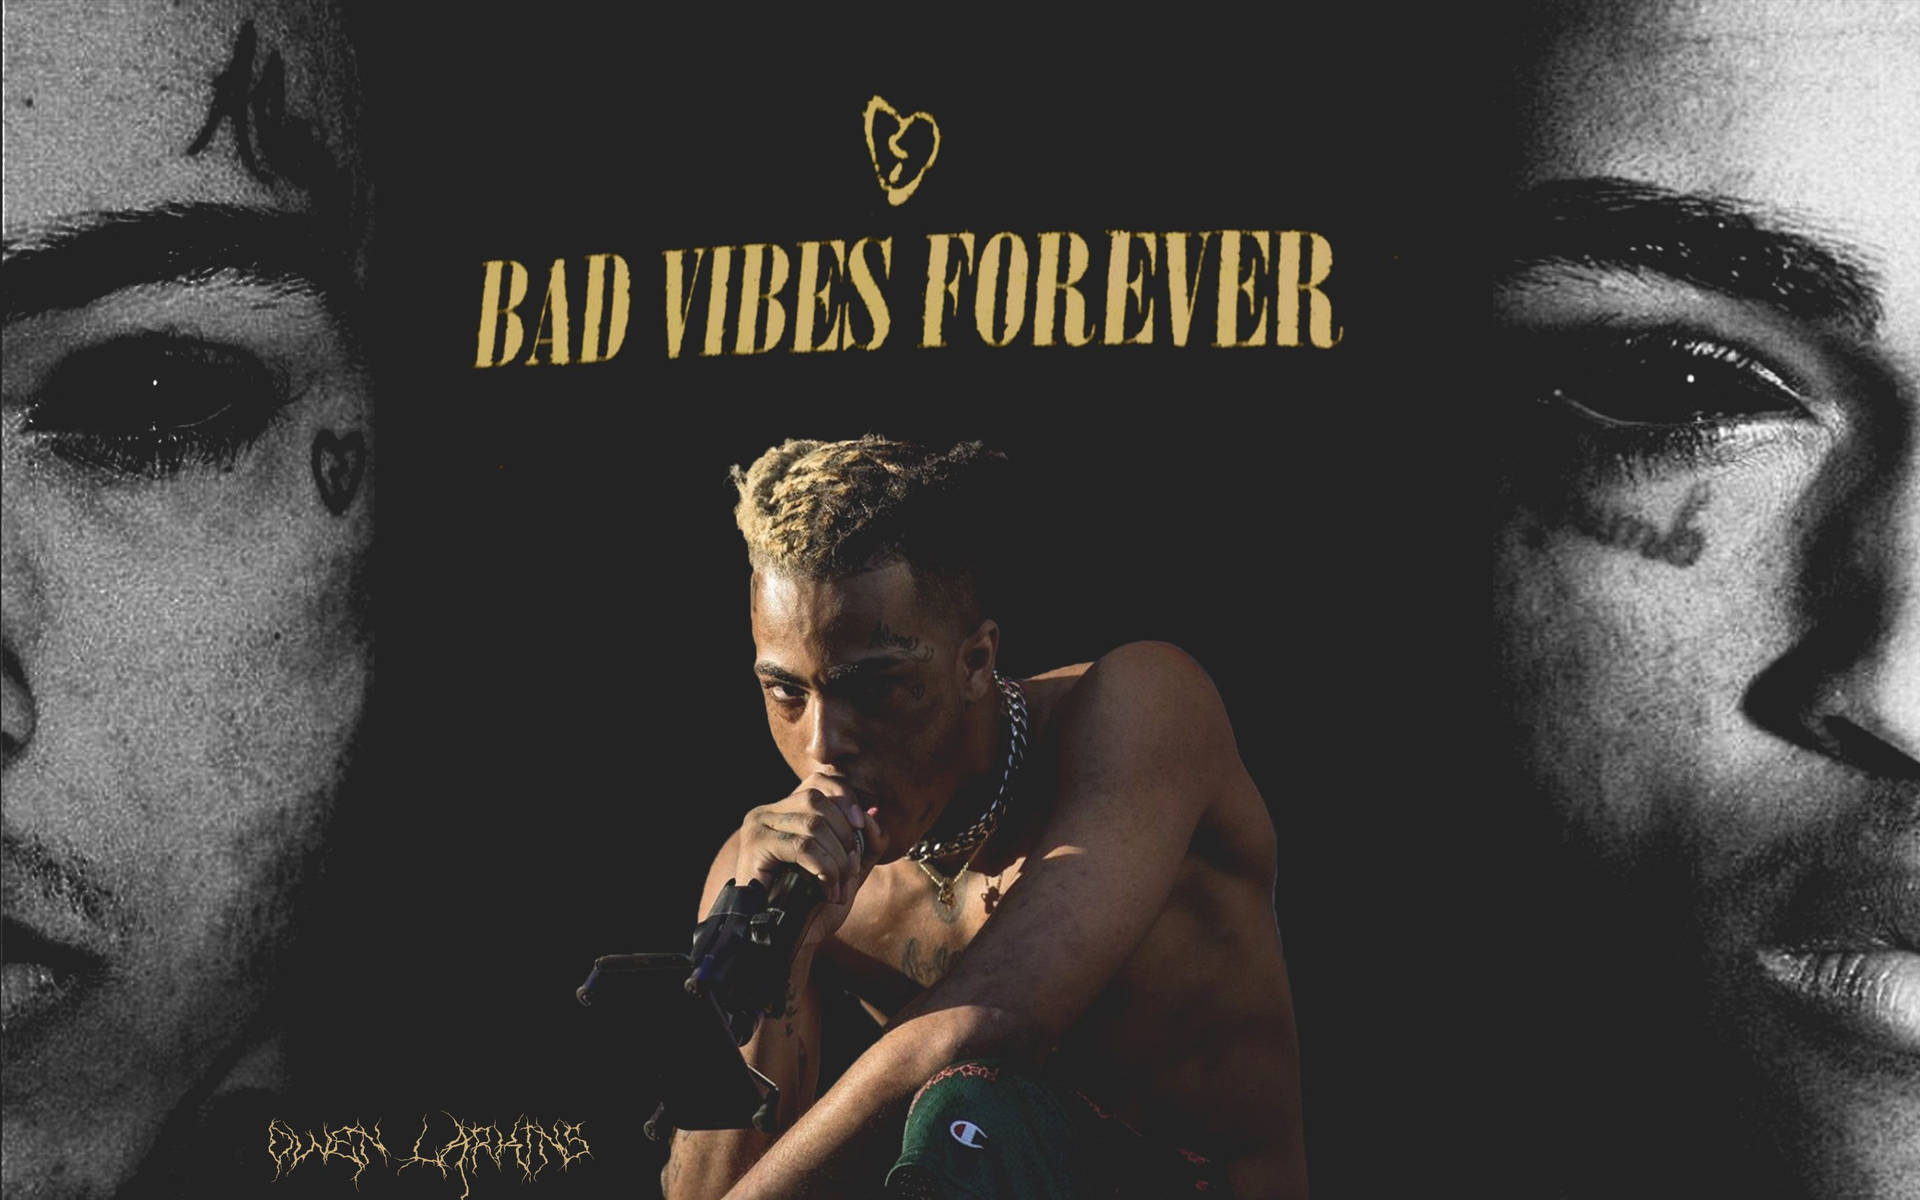 XX Tentacion's Unforgettable Presence in "Bad Vibes Forever" Wallpaper